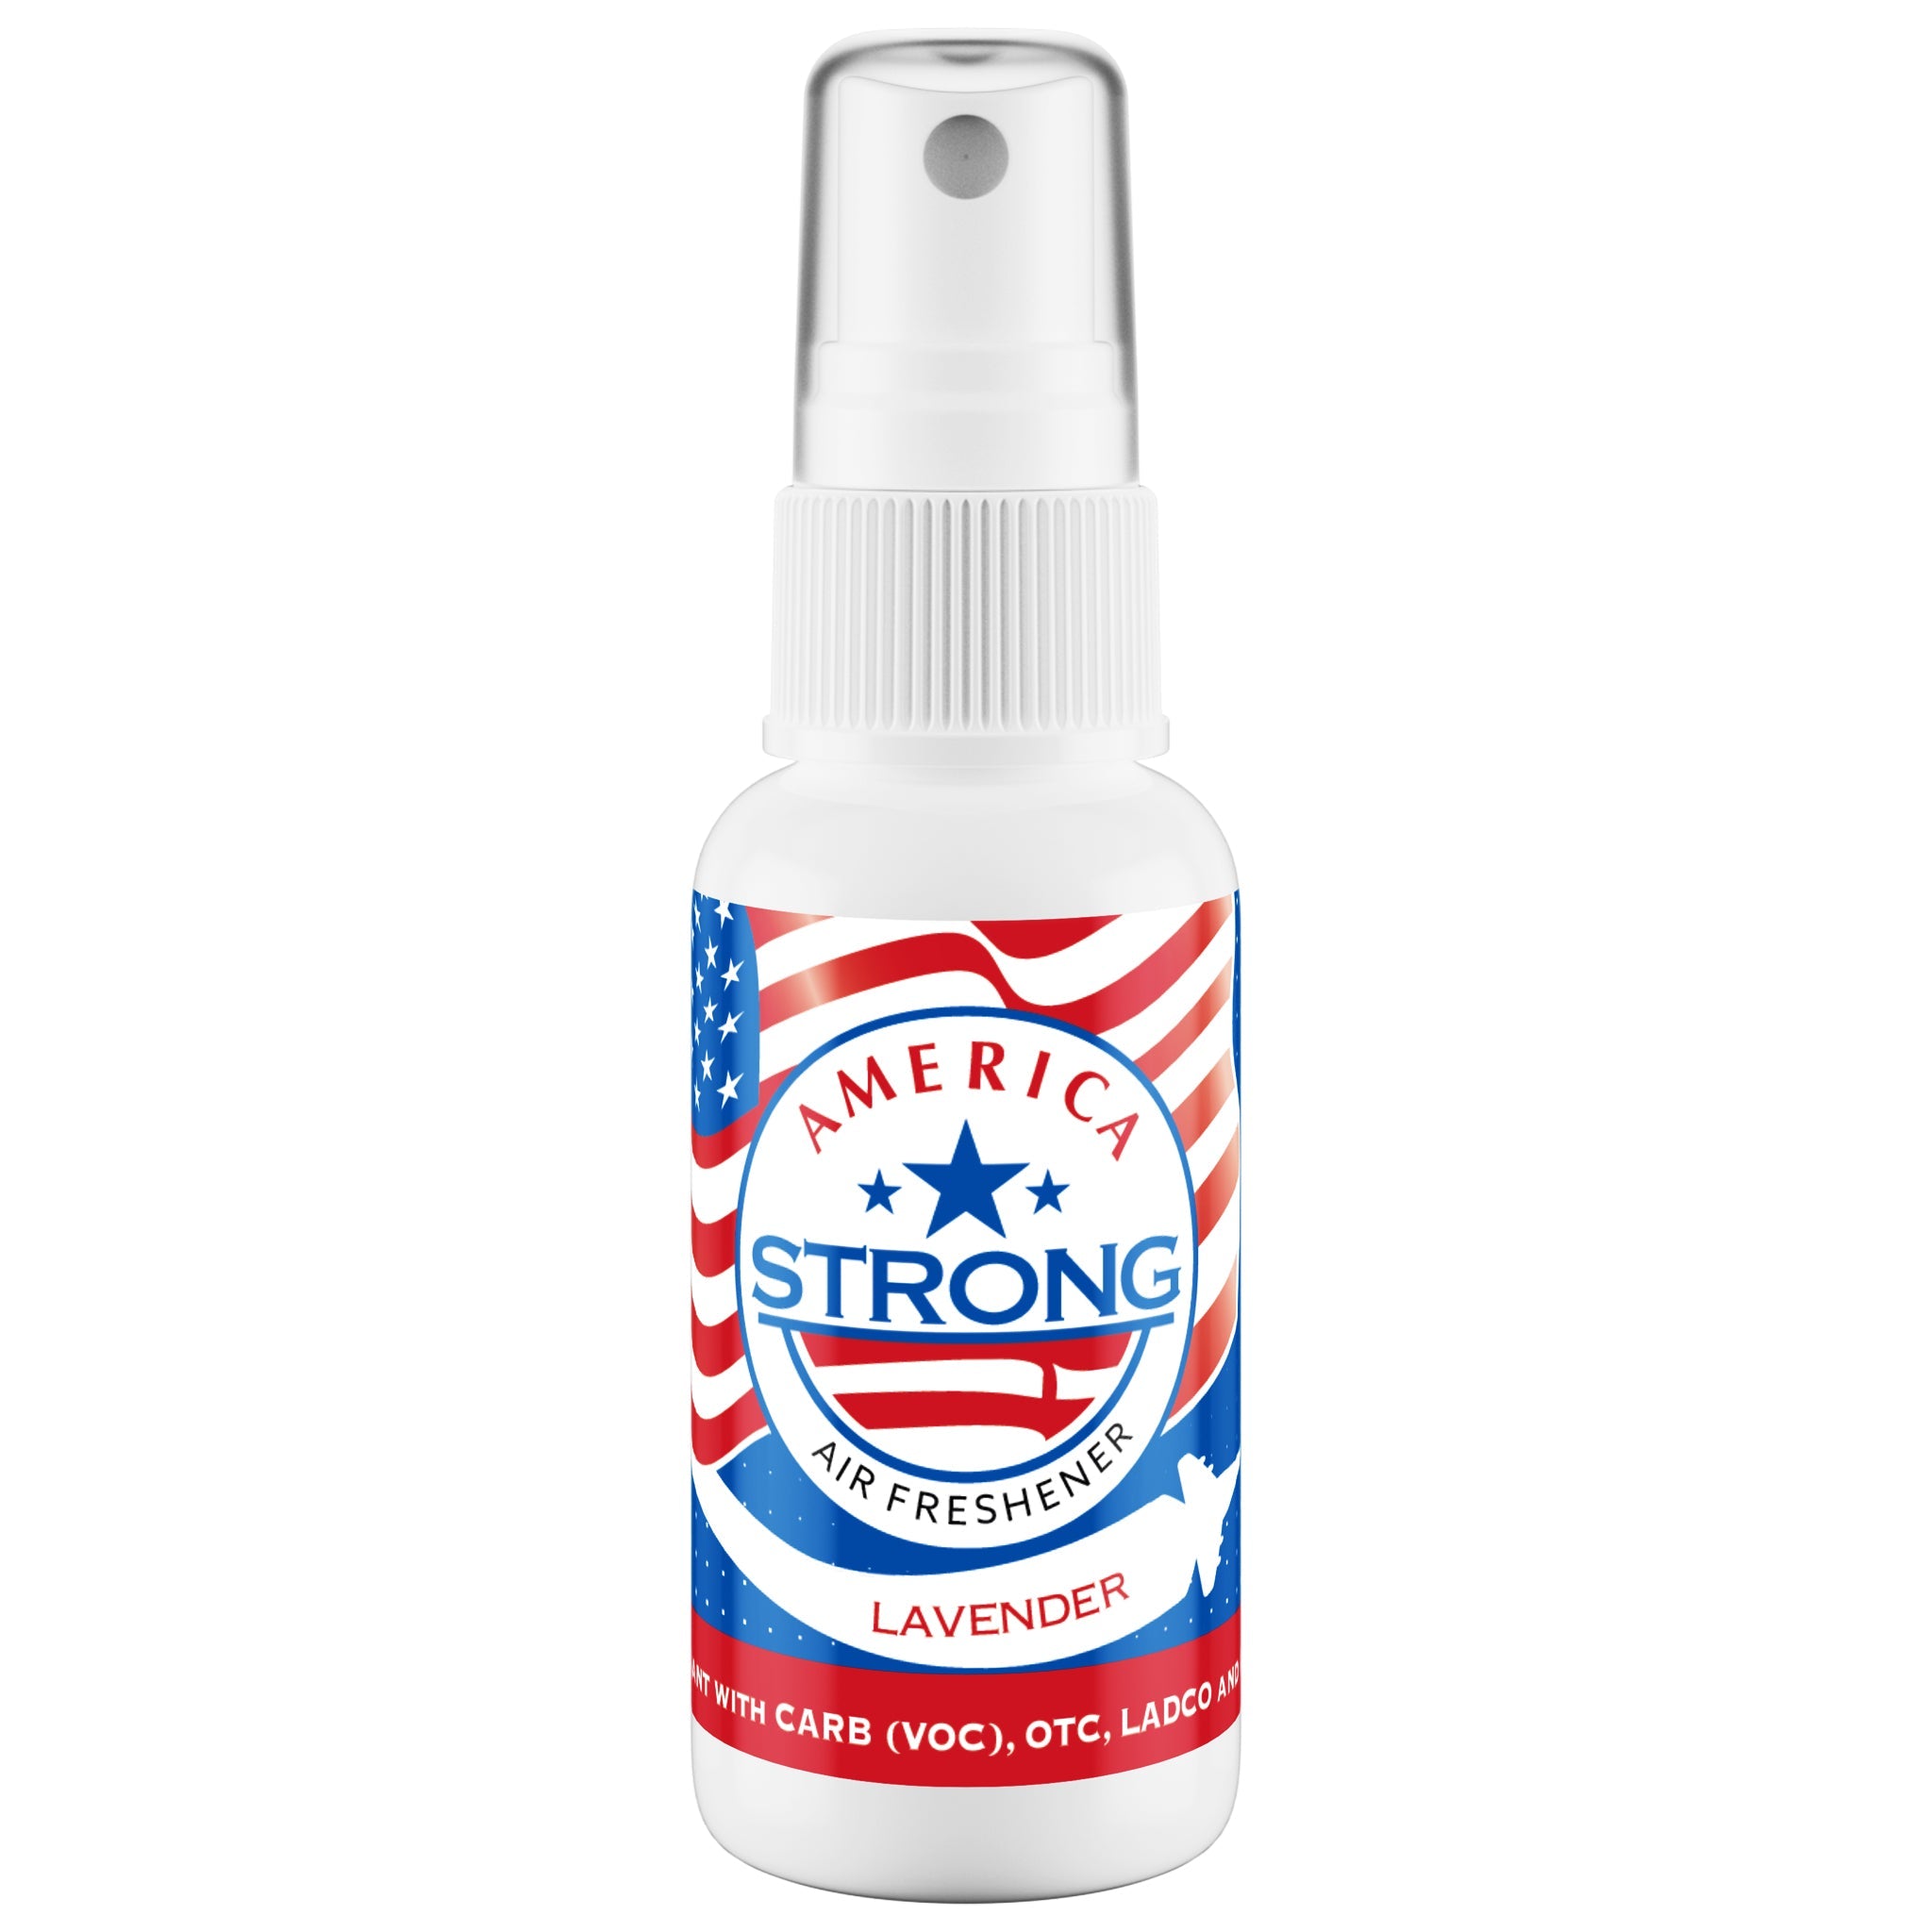 America Strong Air Freshener - Lavender Scent